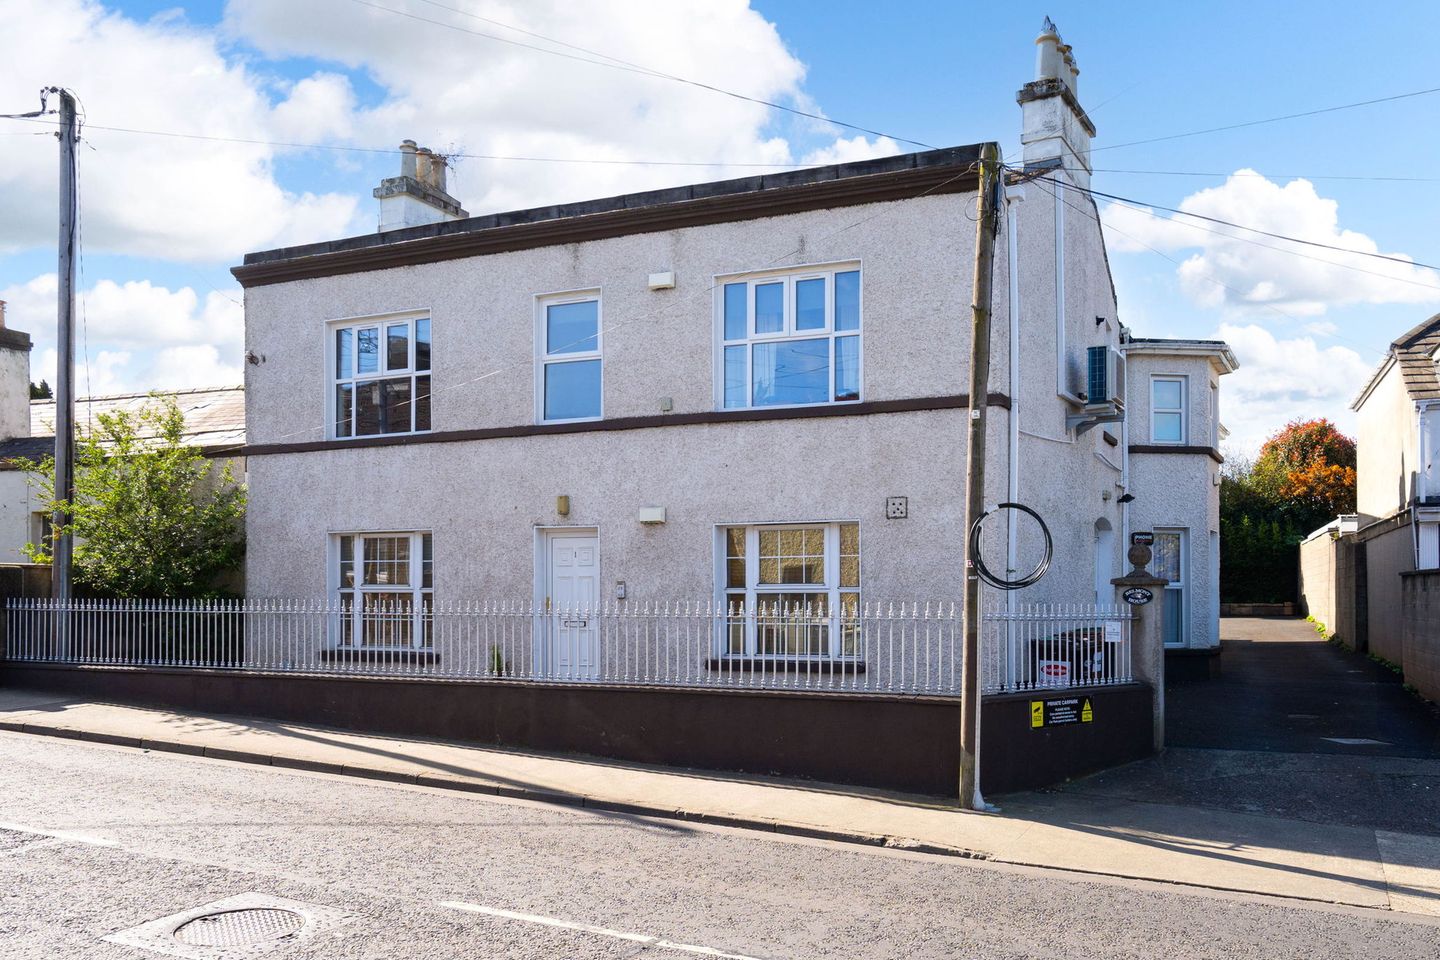 Apartment 2, Belmont House, Bray, Co. Wicklow, A98K038